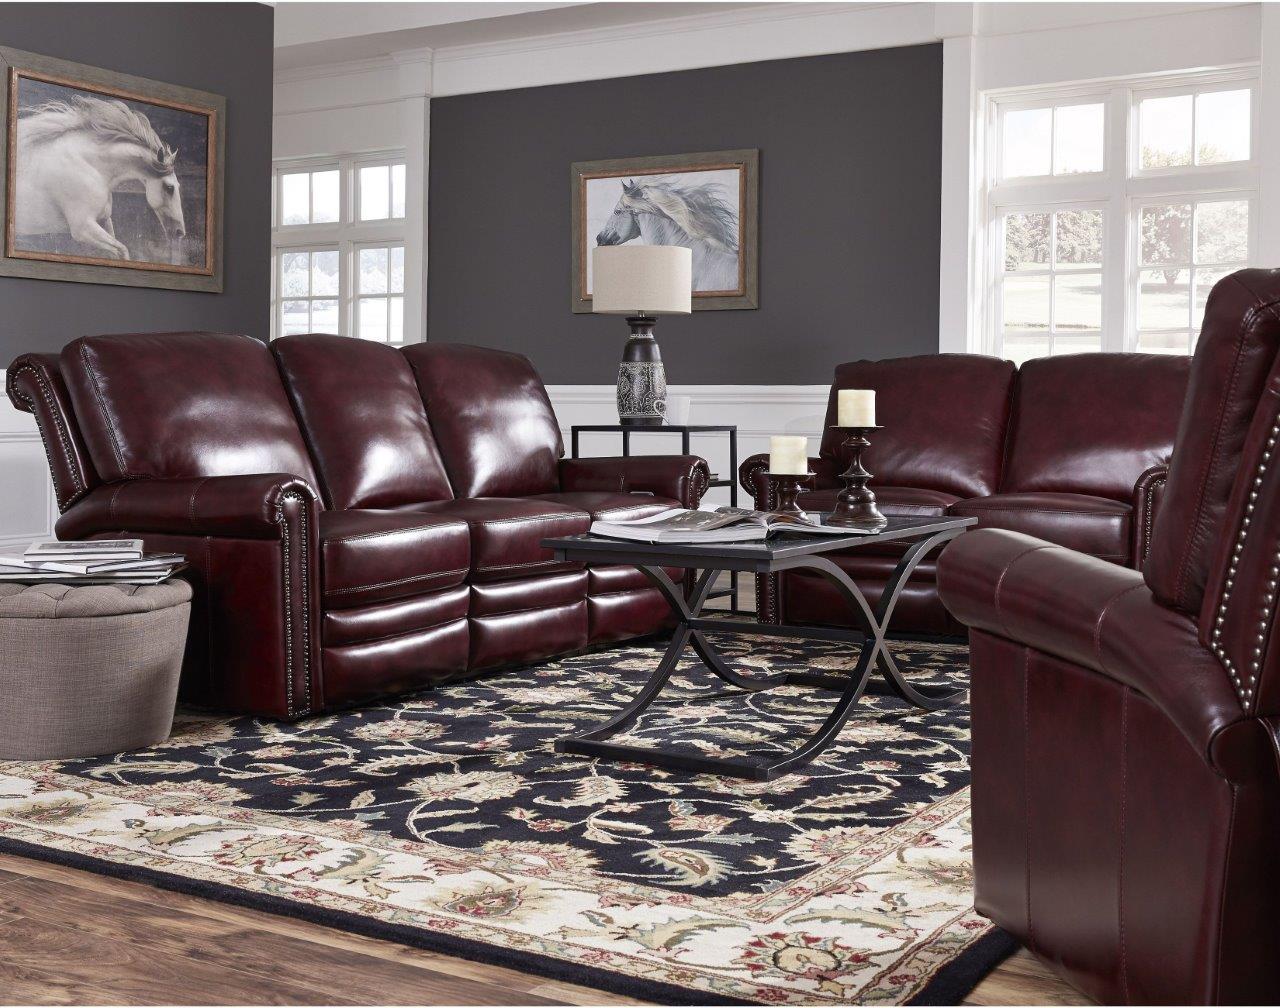 Get The Grant Leather Power Reclining, Pulaski Leather Sectional Sofa With Ottoman Black